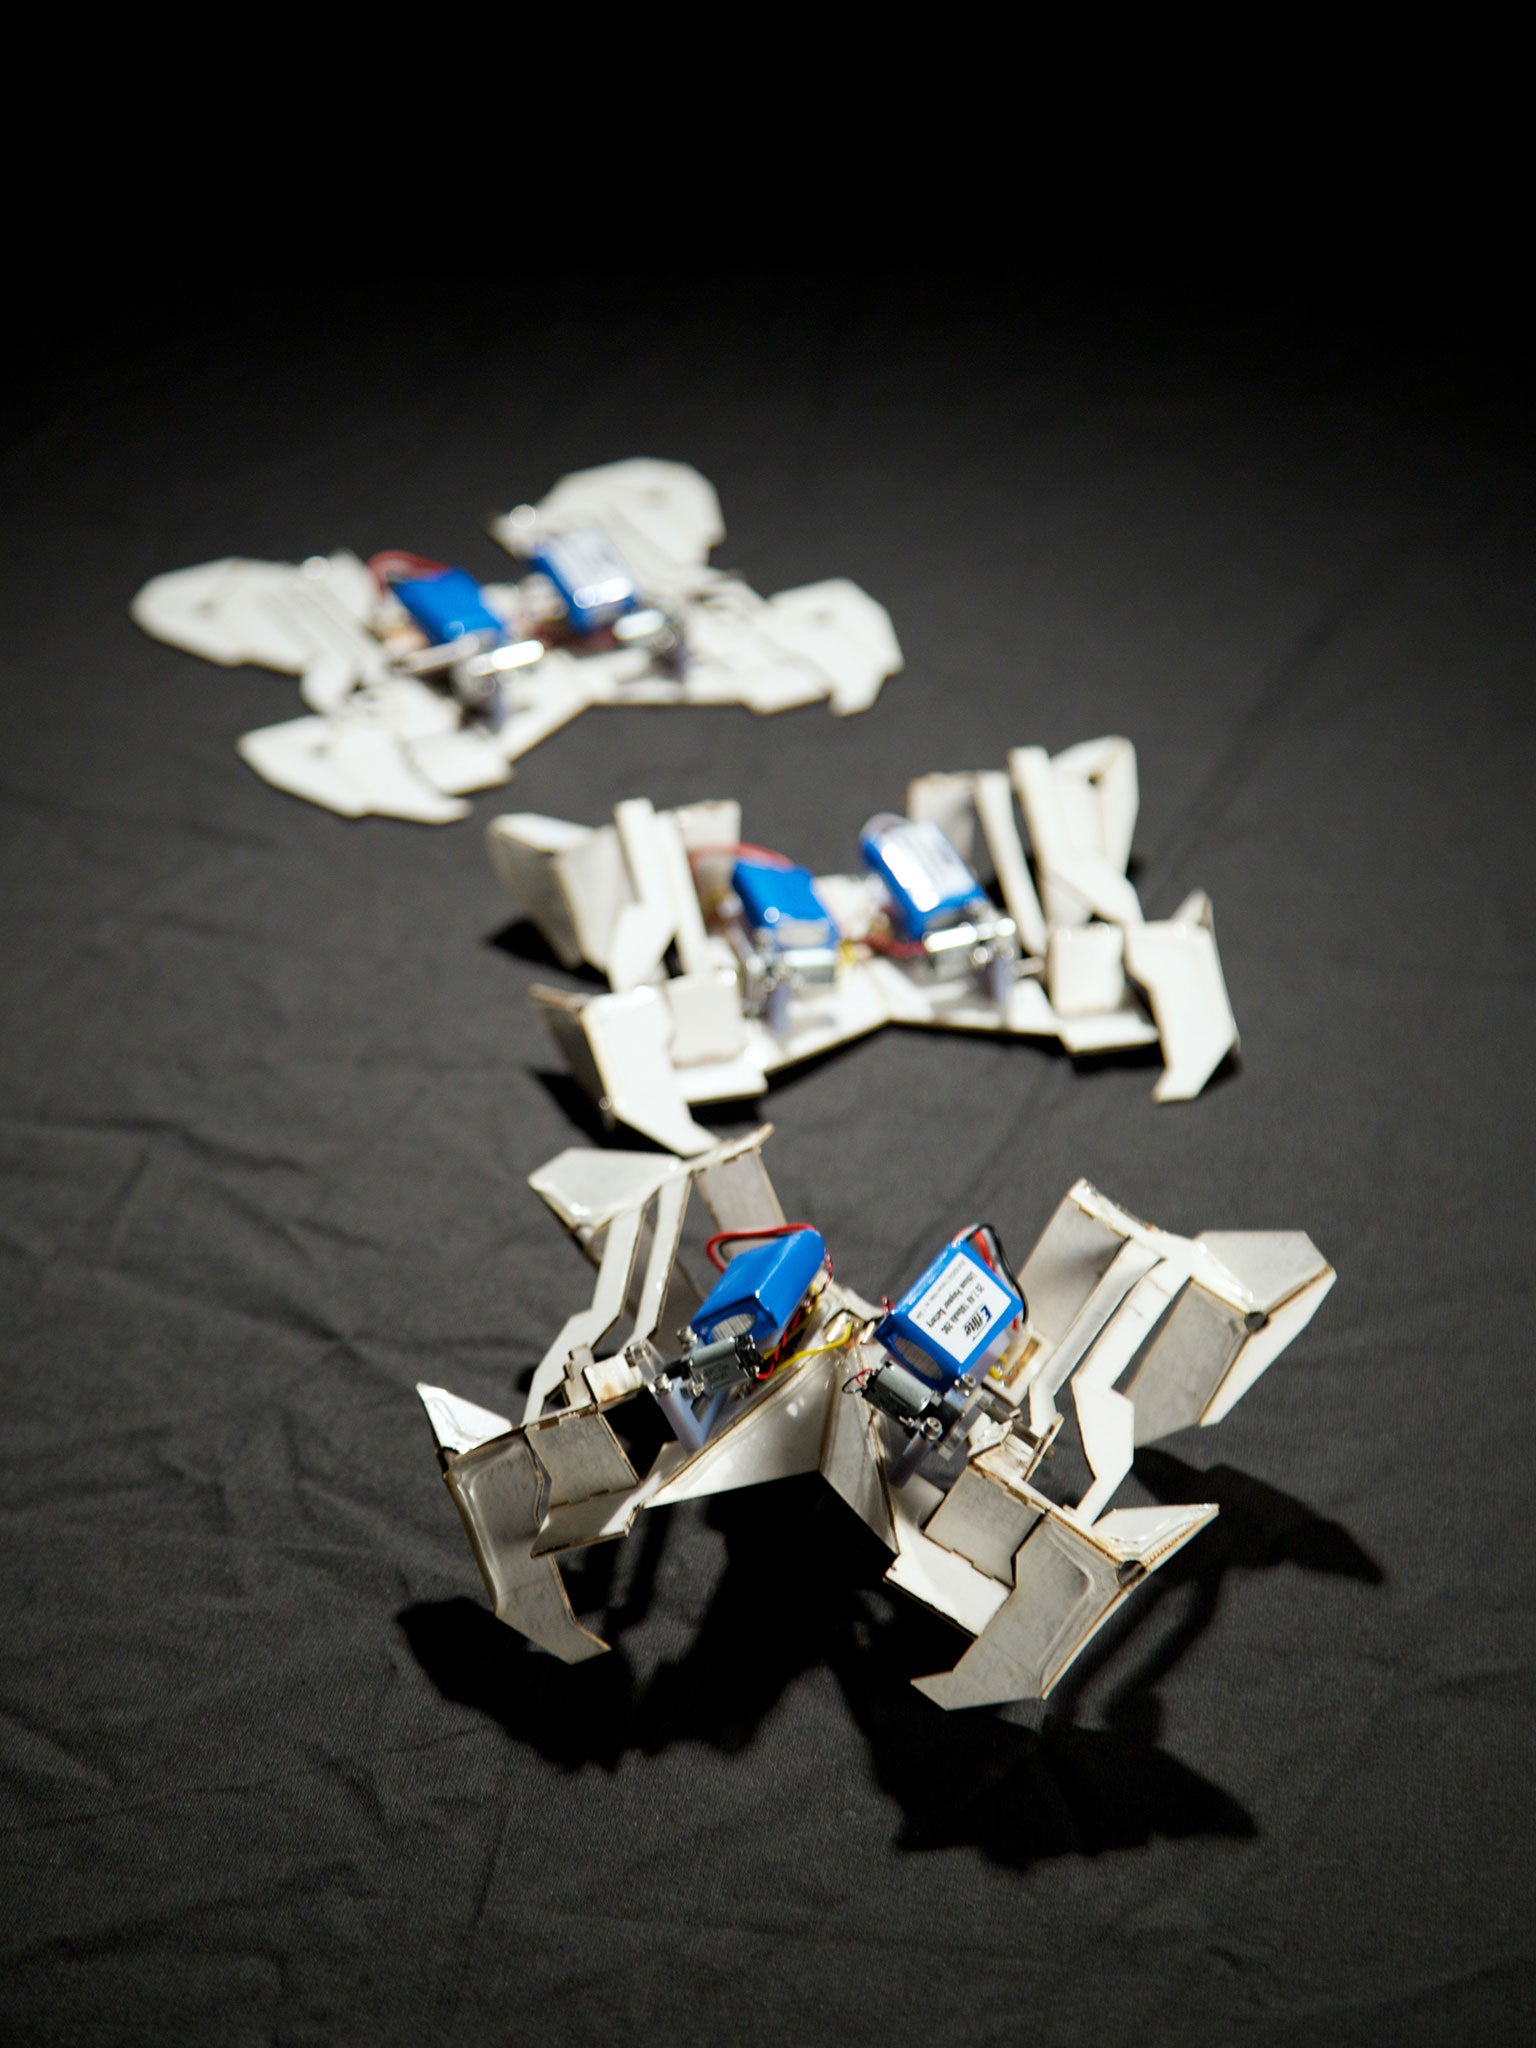 Step By Step Origami Robot Instructions - Jadwal Bus